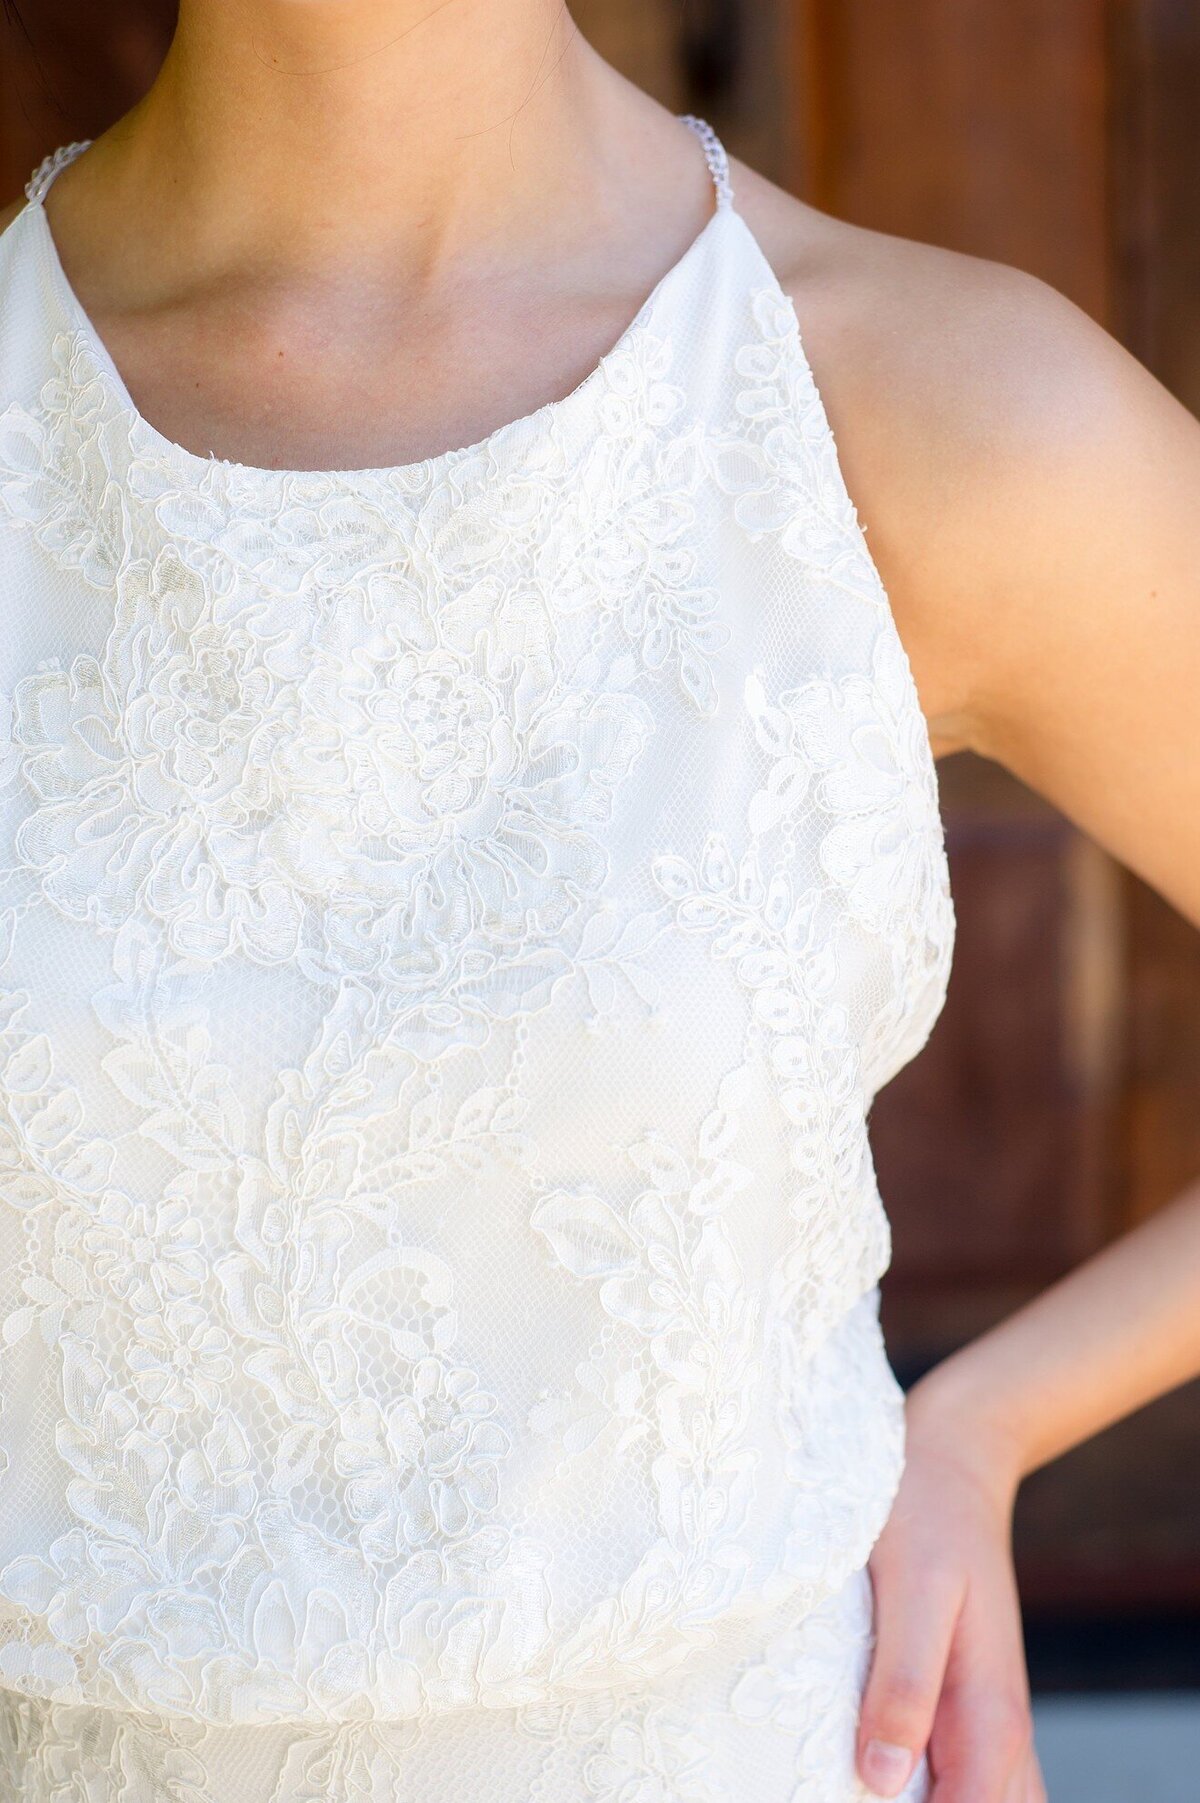 Sabine's lace is a floral pattern with a re-embroidered cord detail for a subtle texture. A crepe fabric acts as the base layer under the lace.